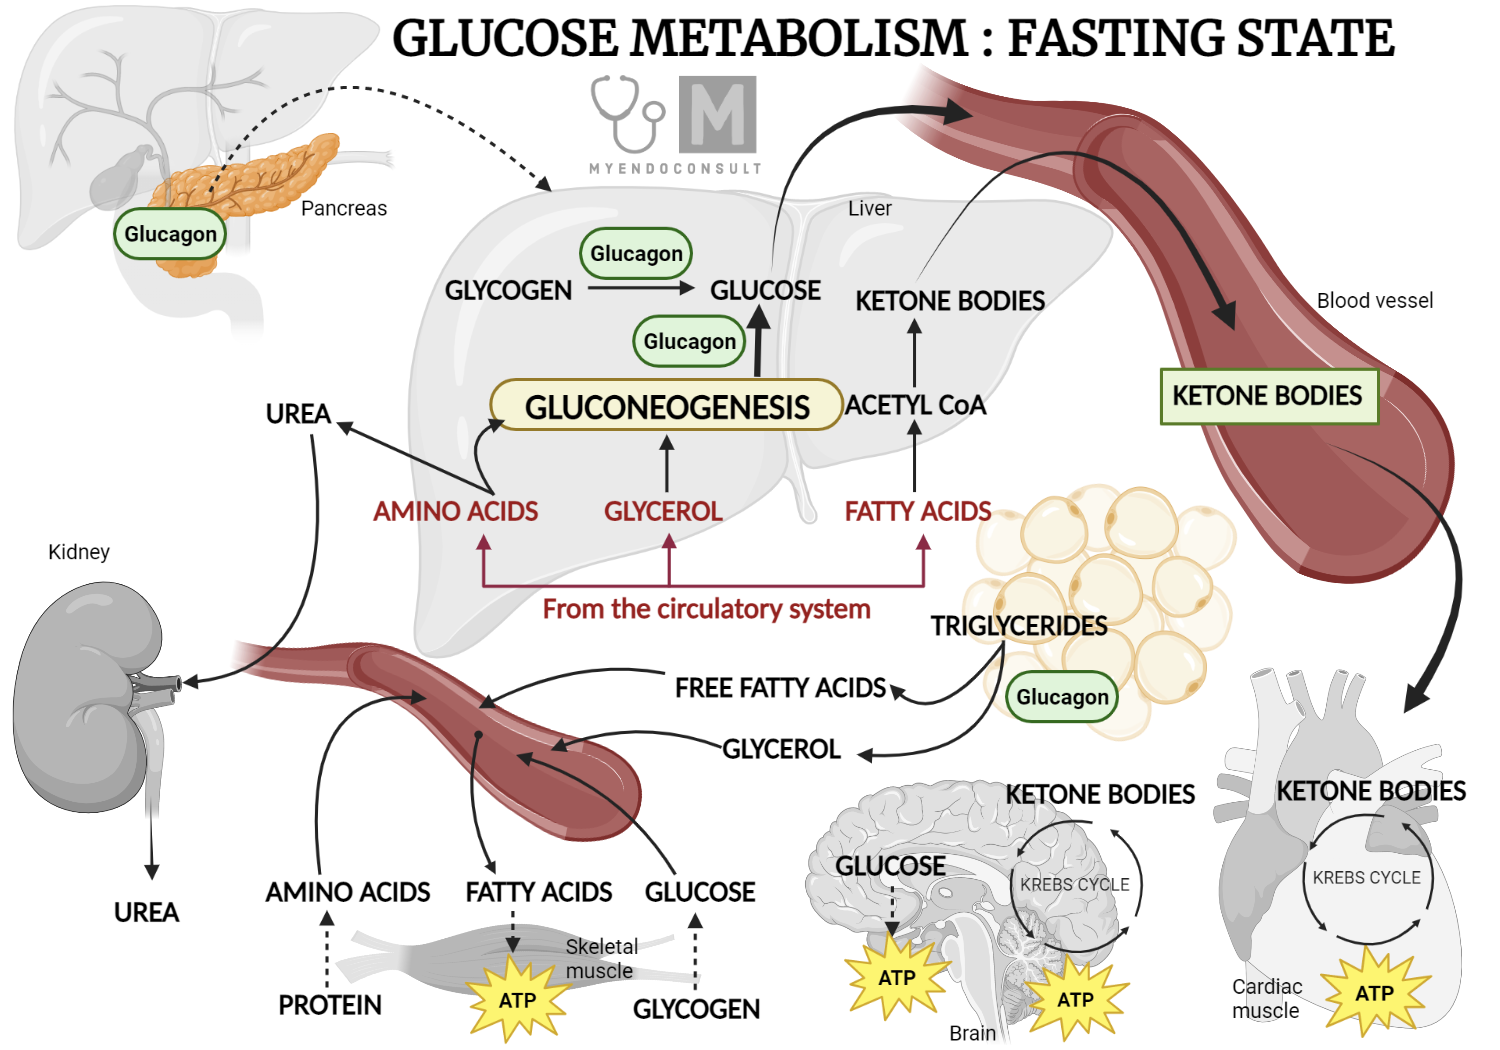 Role of glucagon in glucose metabolism (fasting state)